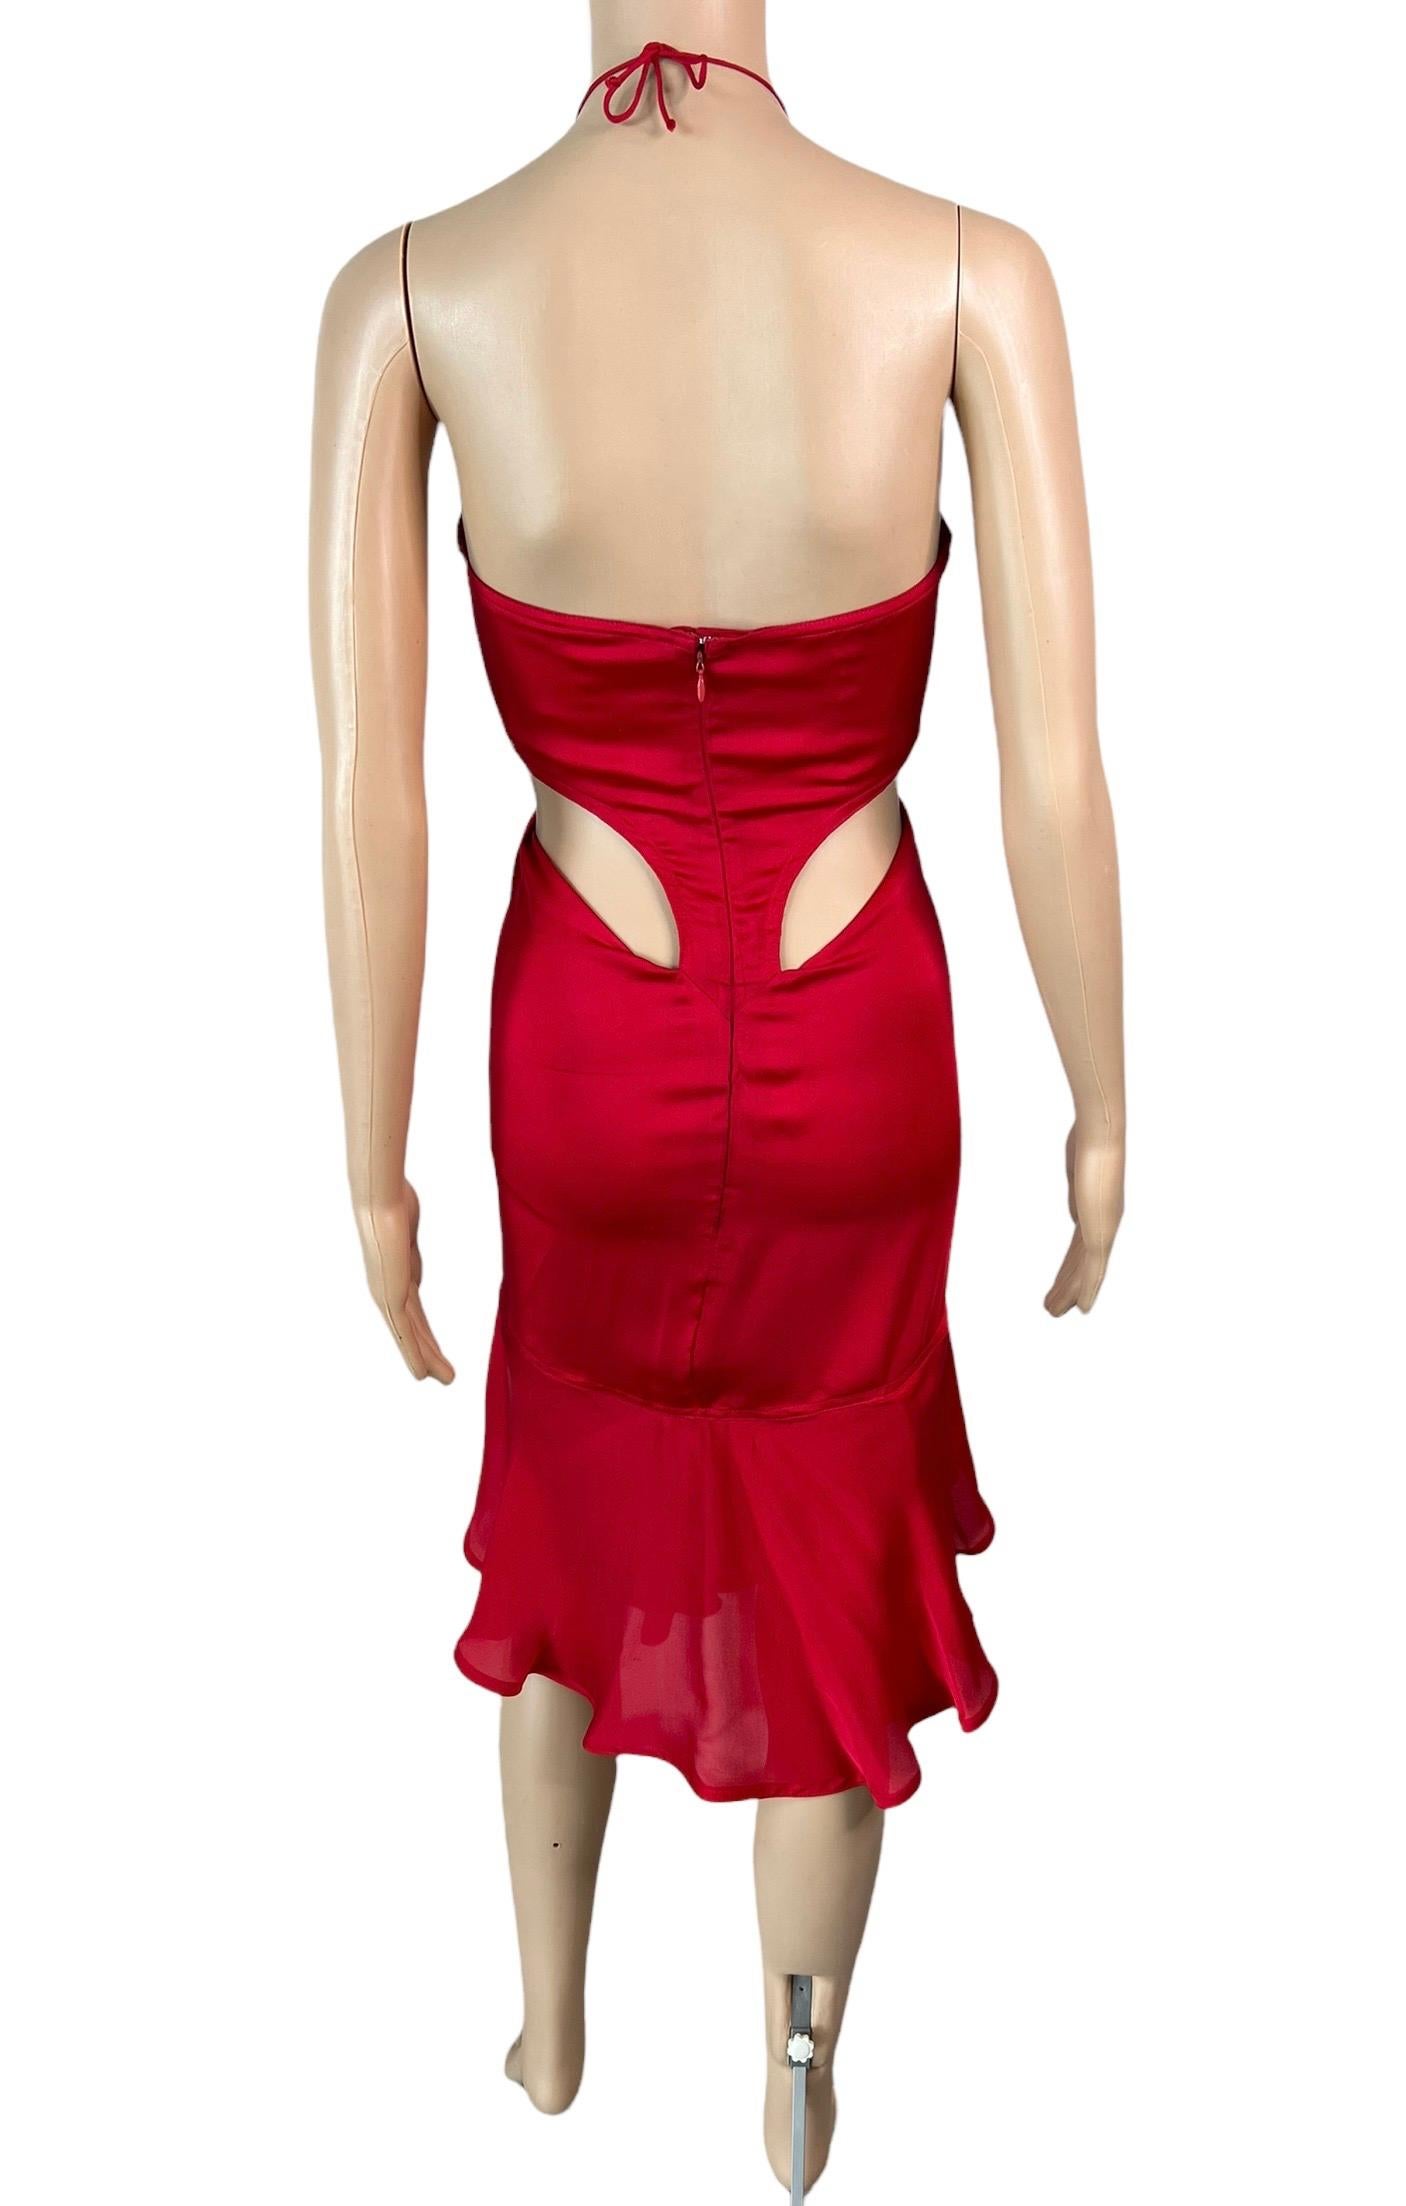 Tom Ford for Yves Saint Laurent  F/W 2003 Runway Ruffled Cutout Bra Red Dress  For Sale 2